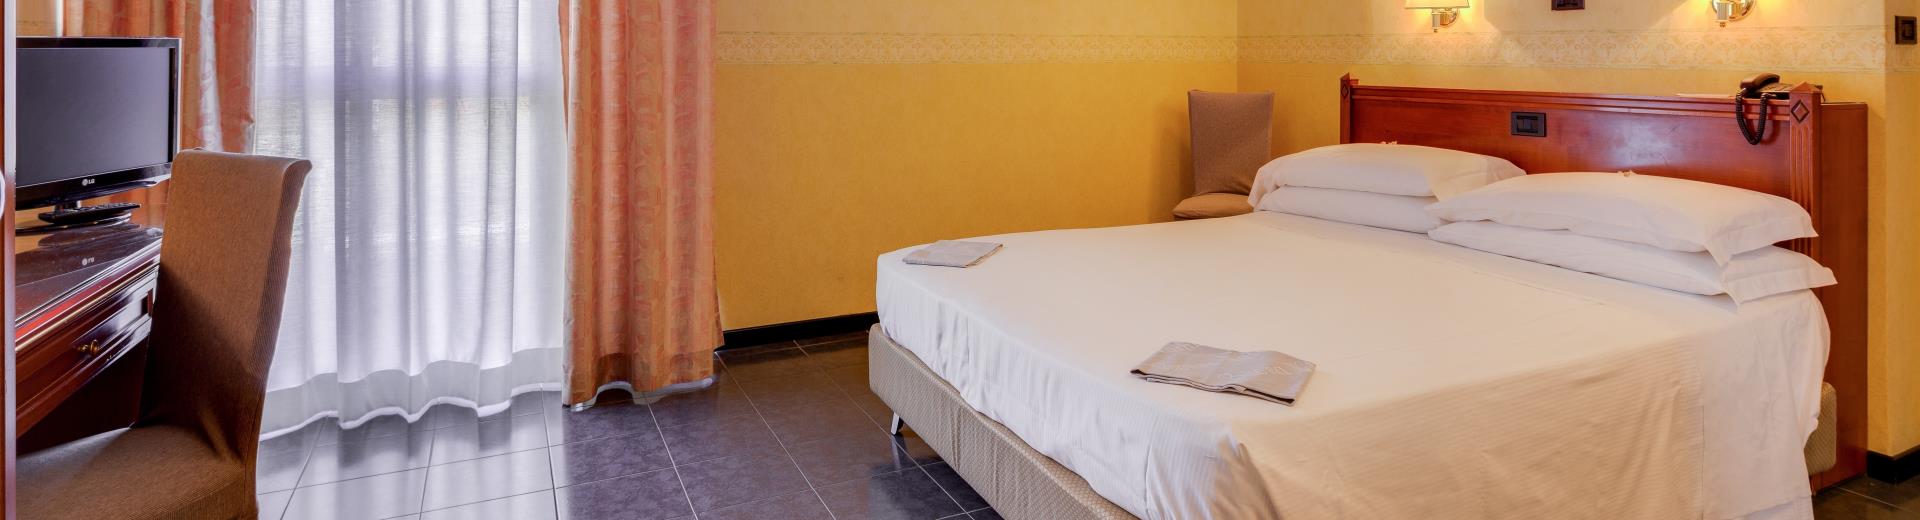 Check out the classic rooms of the 4 star Hotel San Donato Bologna